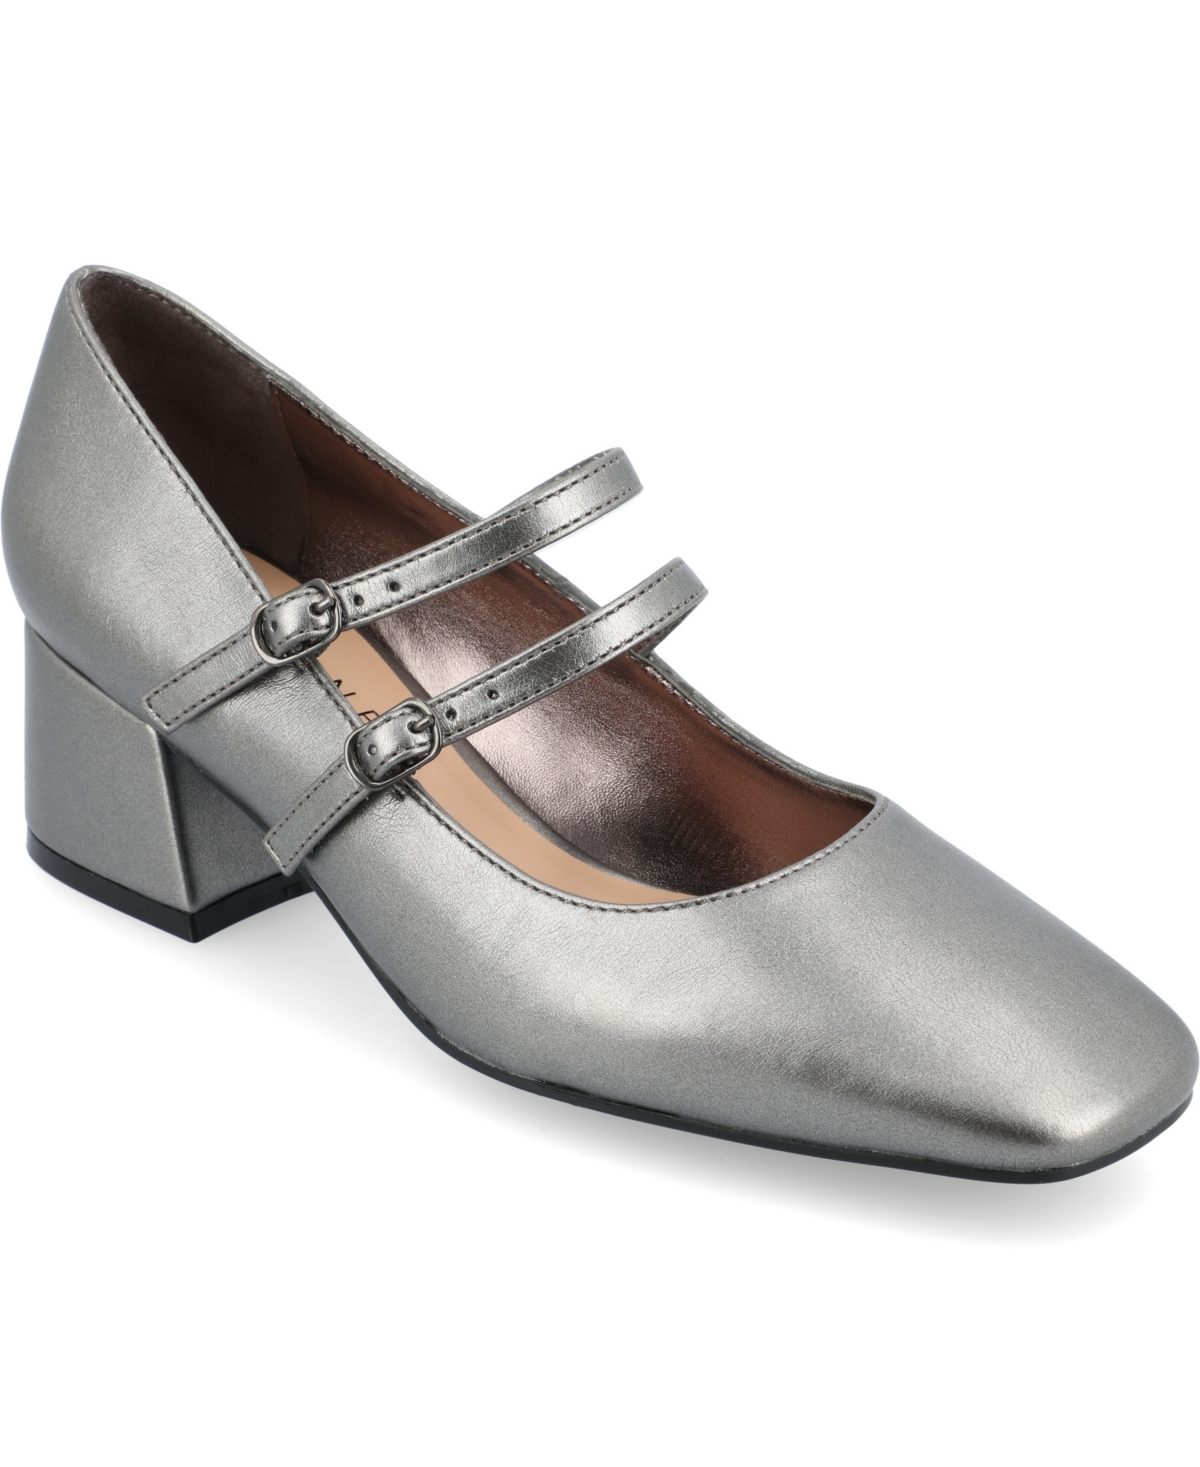 Women's Nally Double Strap Mary Jane Pumps - Pewter